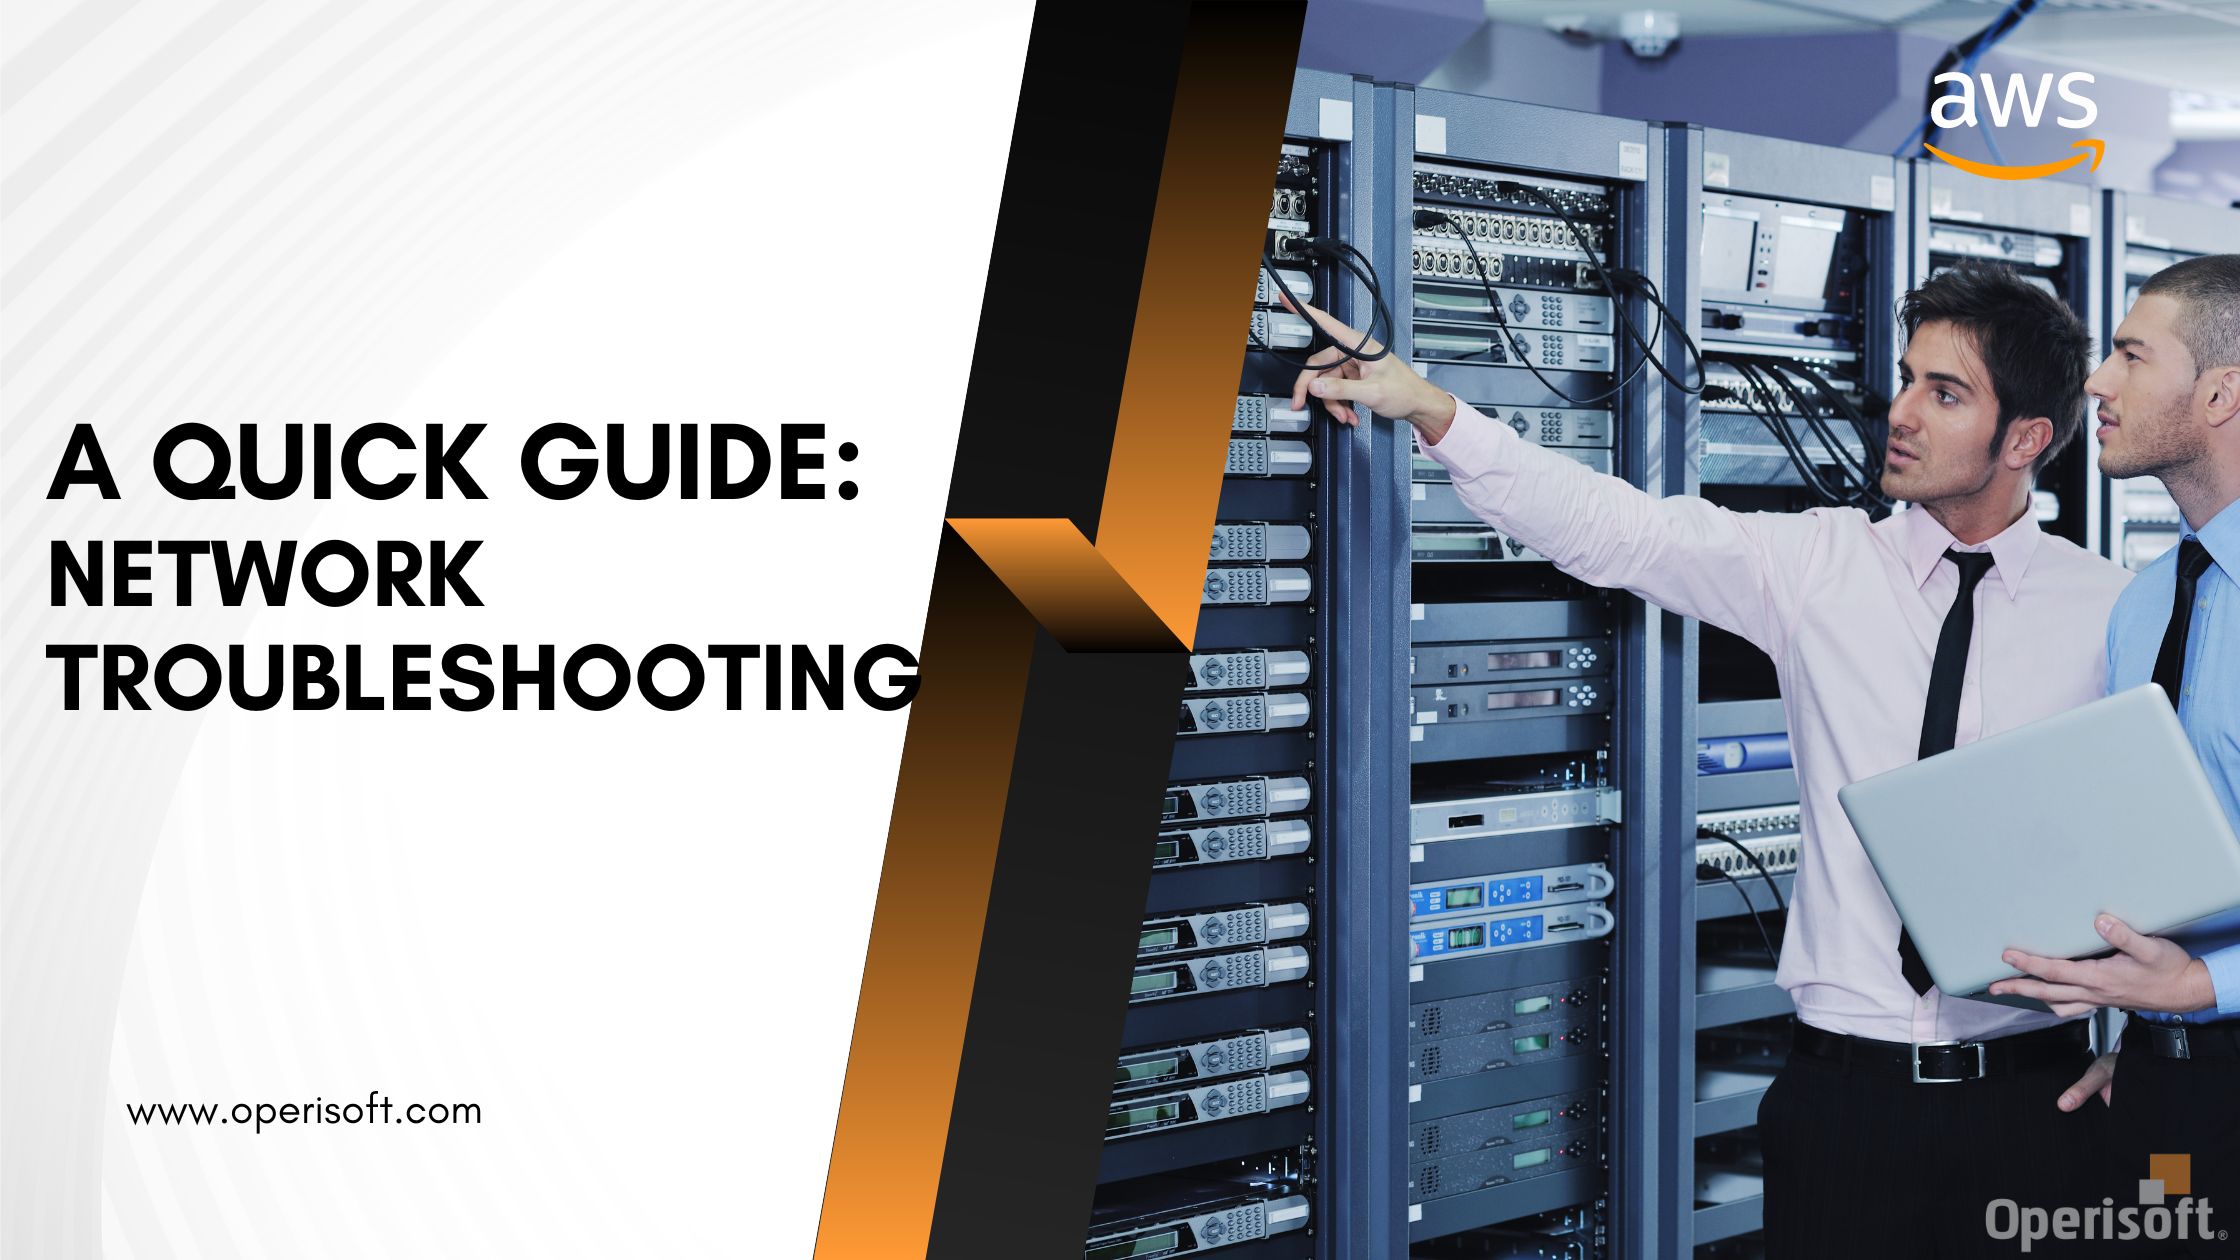 A quick guide Network troubleshooting